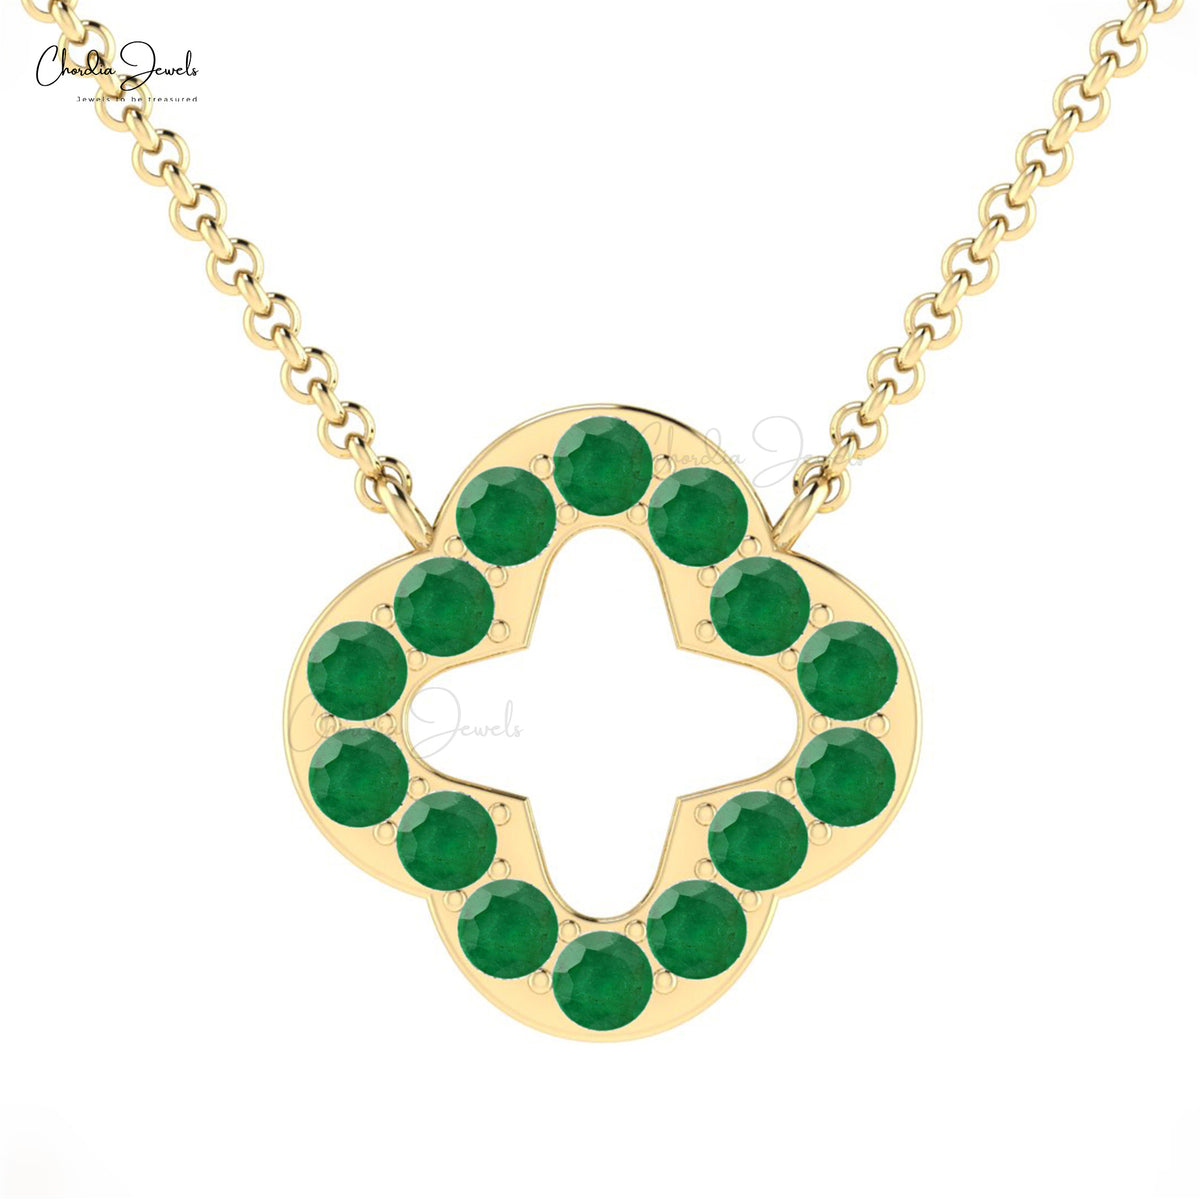 14K Yellow Gold Malachite Four Leaf Clover Necklace, Green